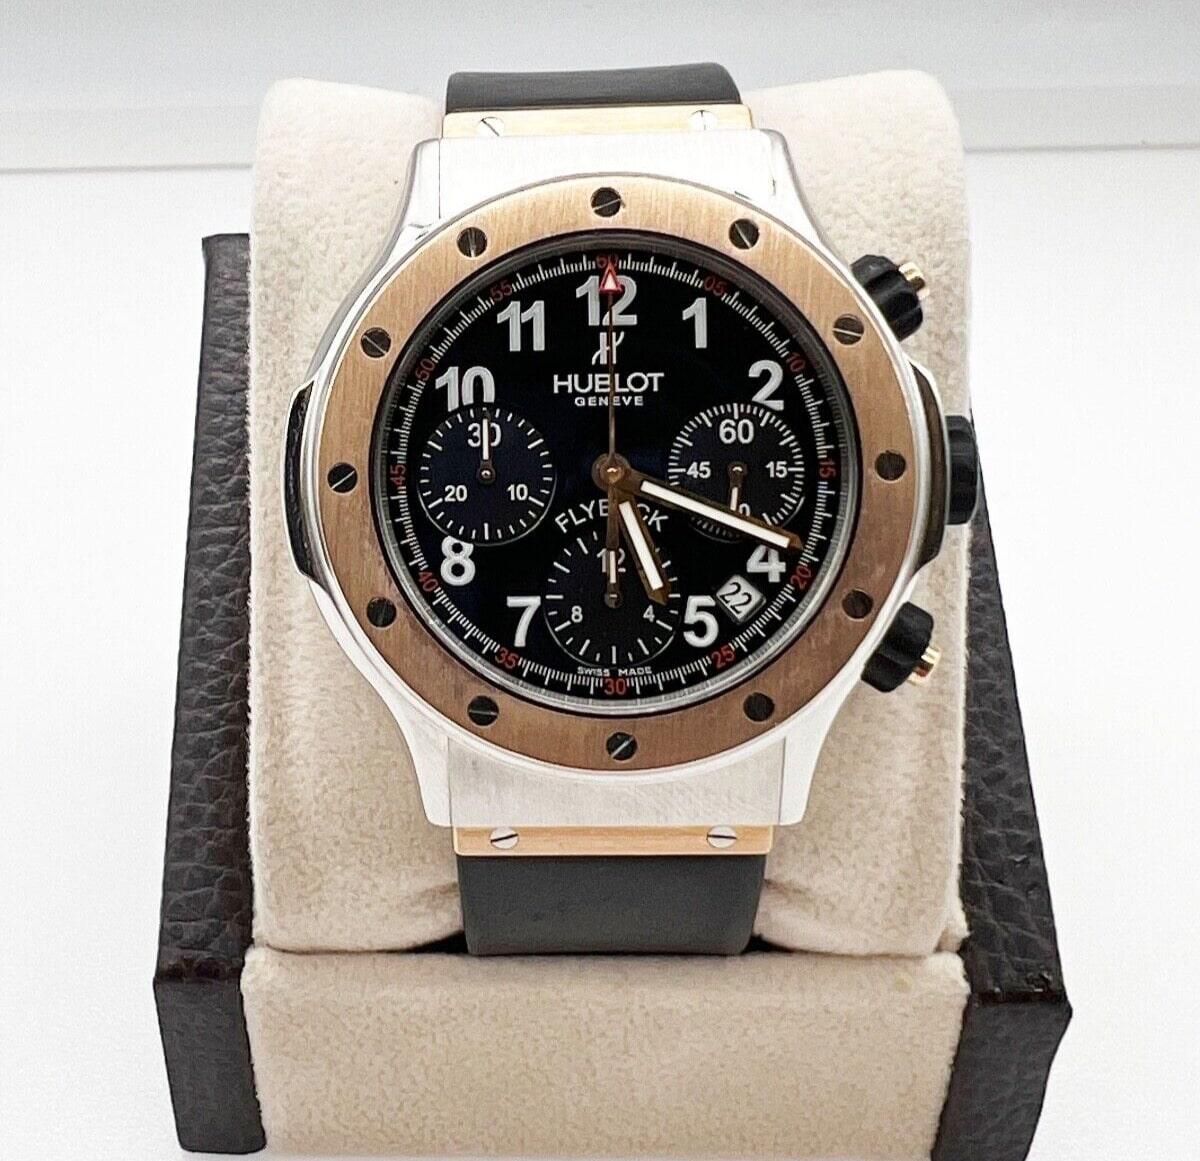 Hublot 1926.7 Super B Flyback Chronograph 18K Rose Gold Steel Rubber Strap In Excellent Condition For Sale In San Diego, CA